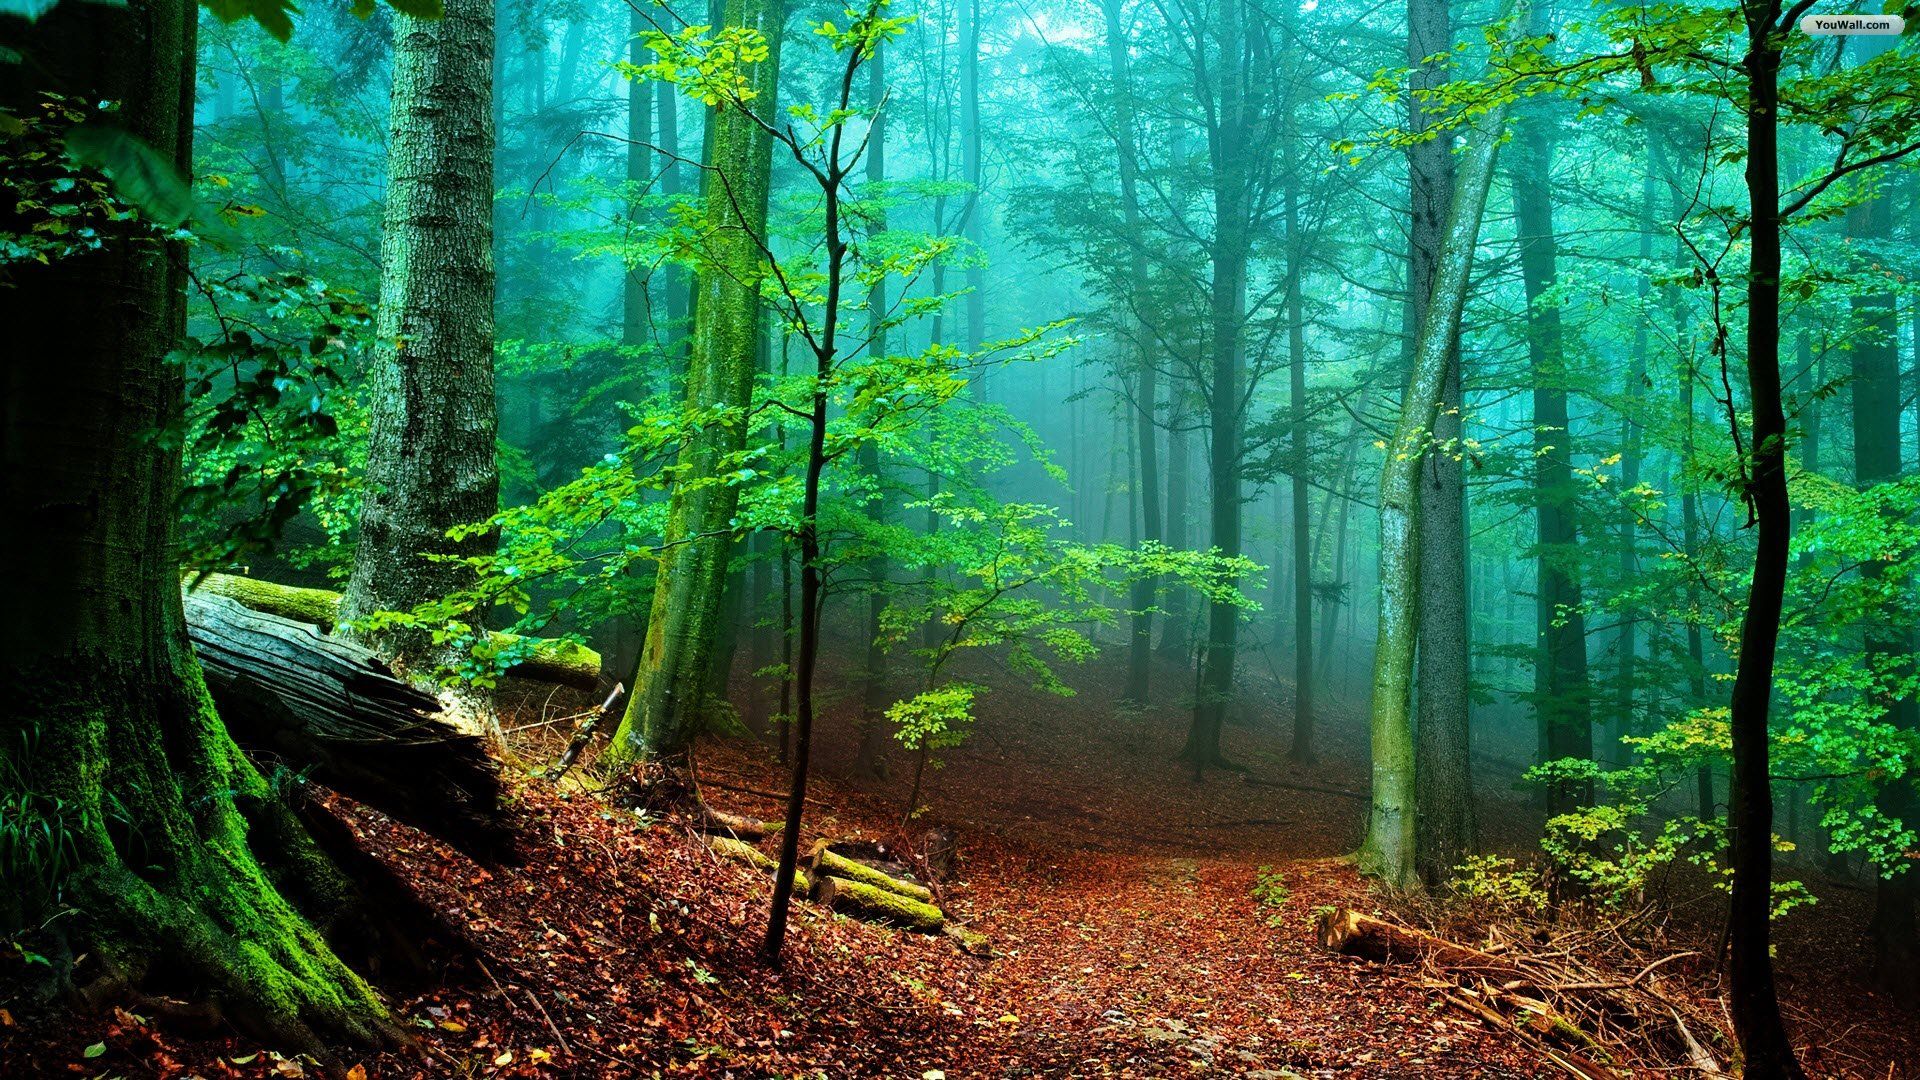 HD Great Forest Wallpaper HD 1080p Full Size - HiReWallpapers 3162